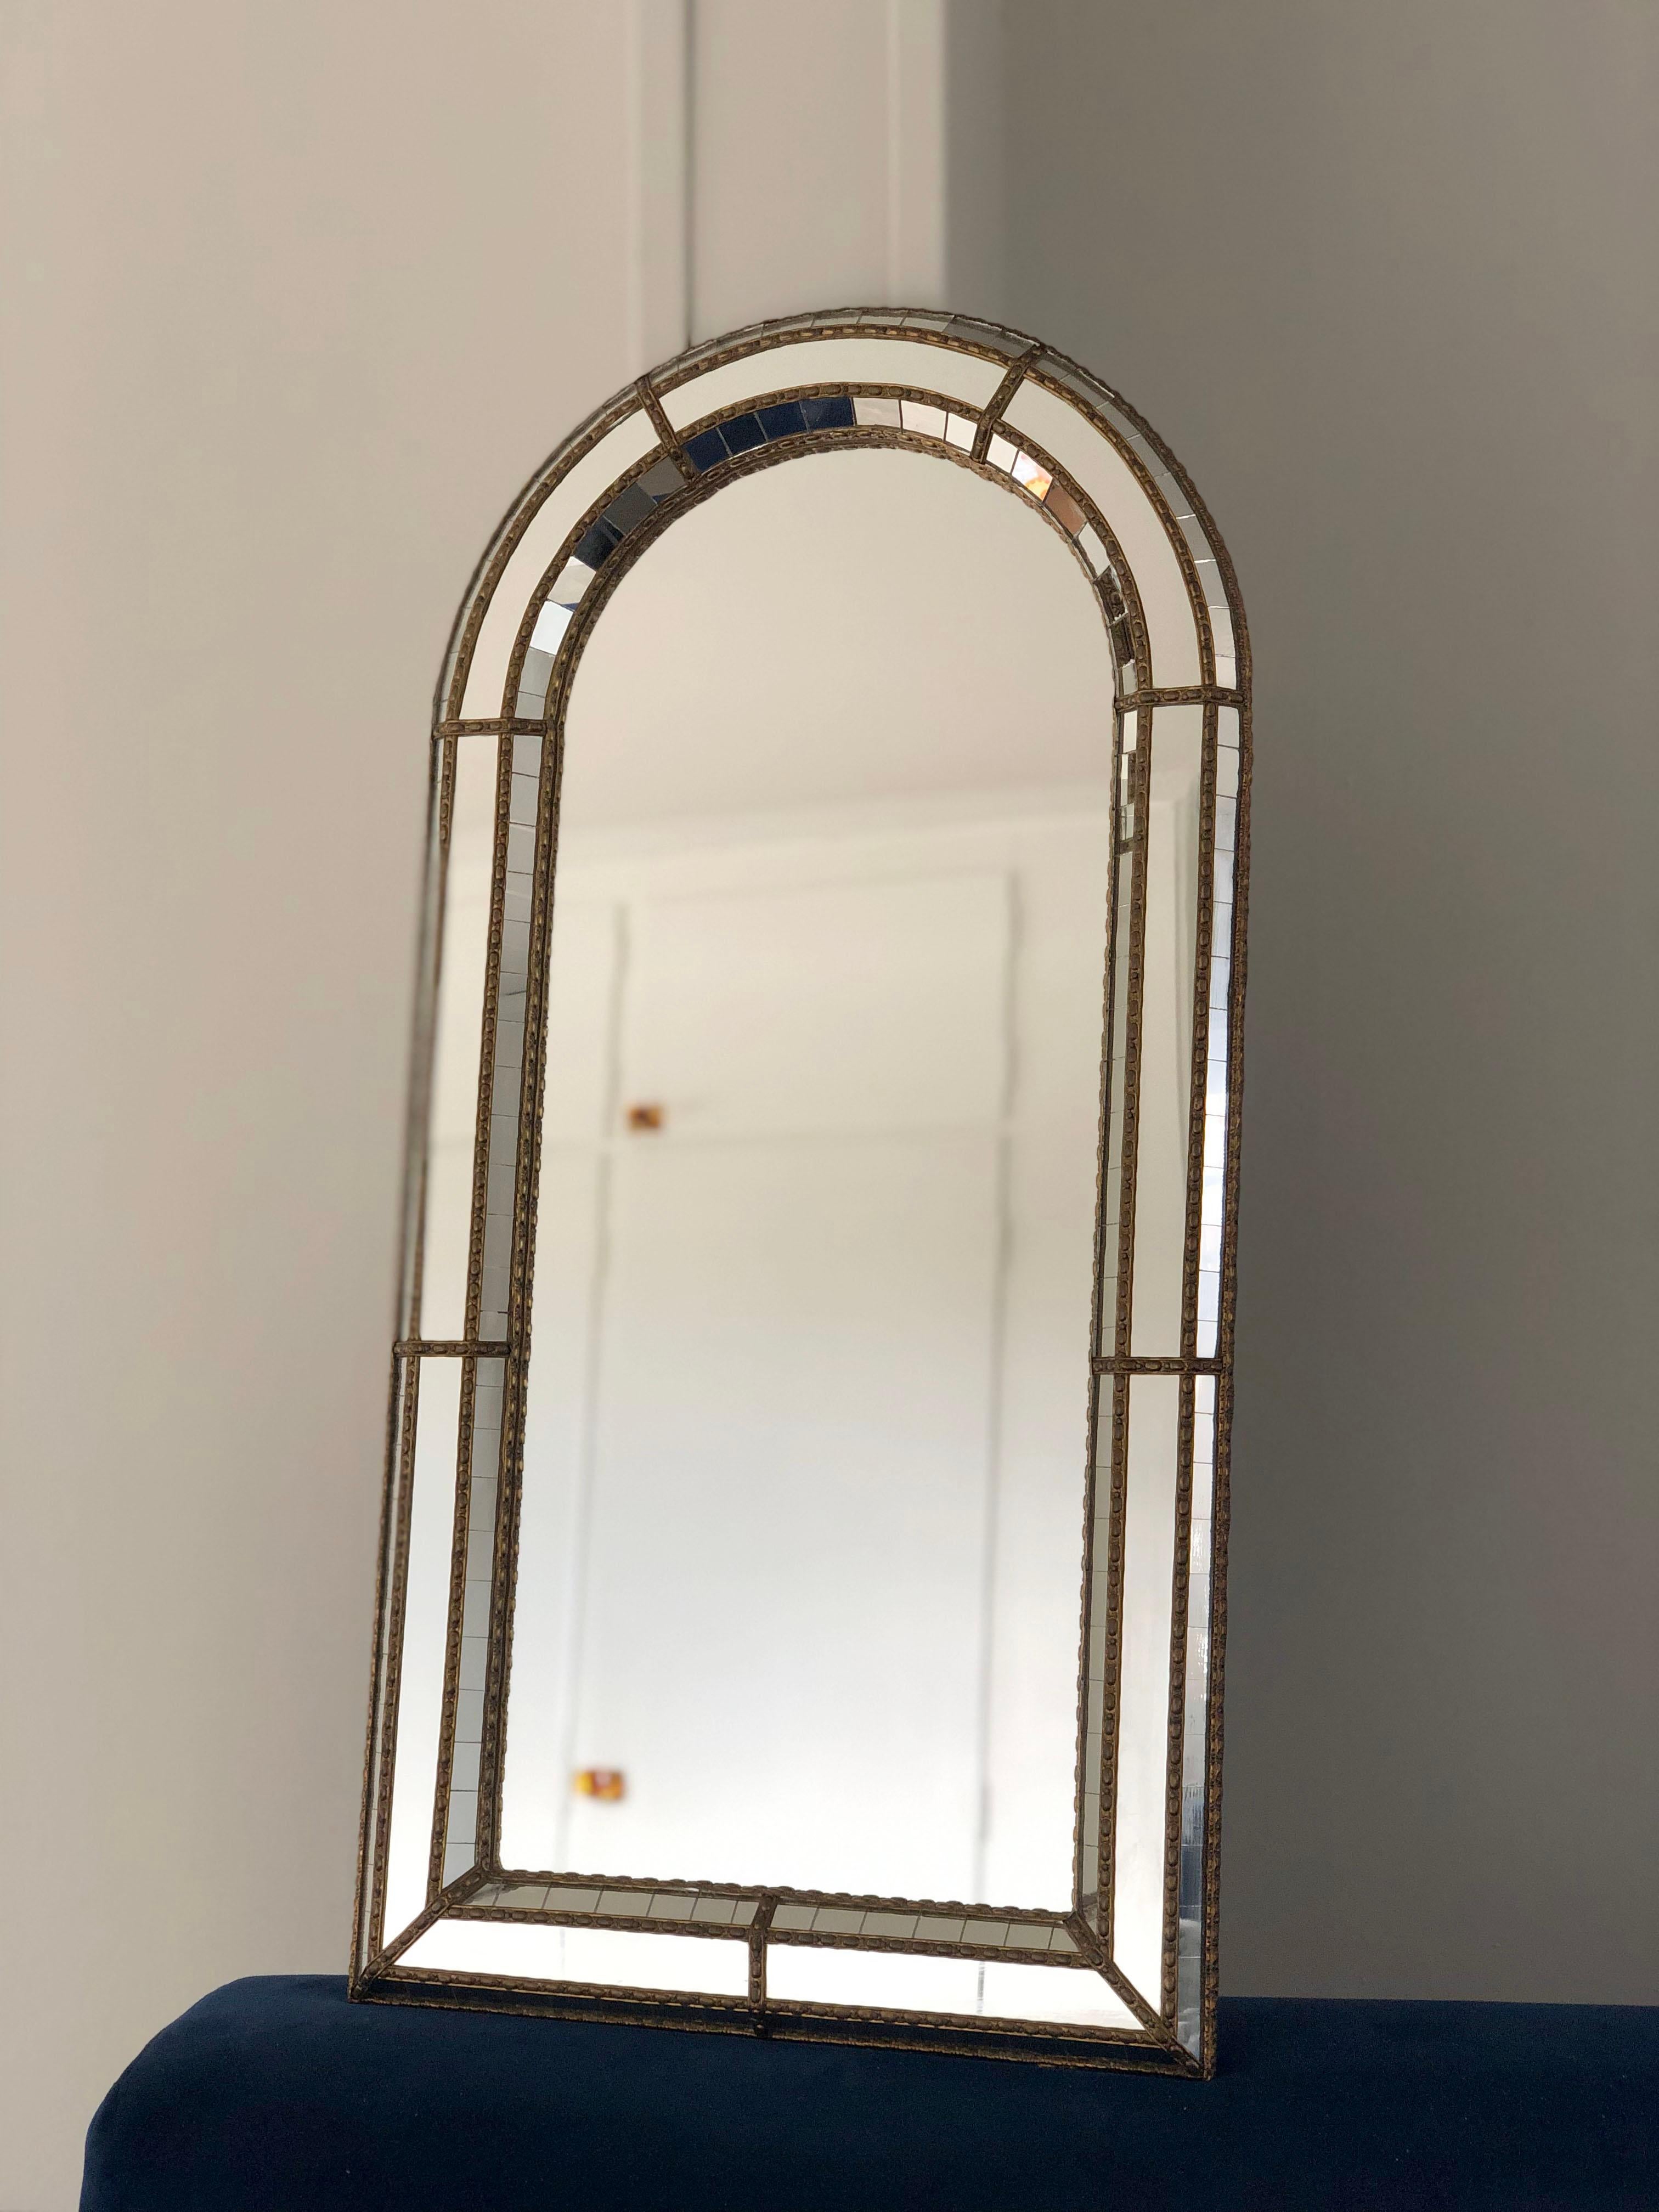 2 identical beautiful Spanish mirrors with a Venetian glass frame with a brass golden strip. The frame is made with small crystals both on the outside and inside, and larger ones in the center line. The brass strip holds the mirrors